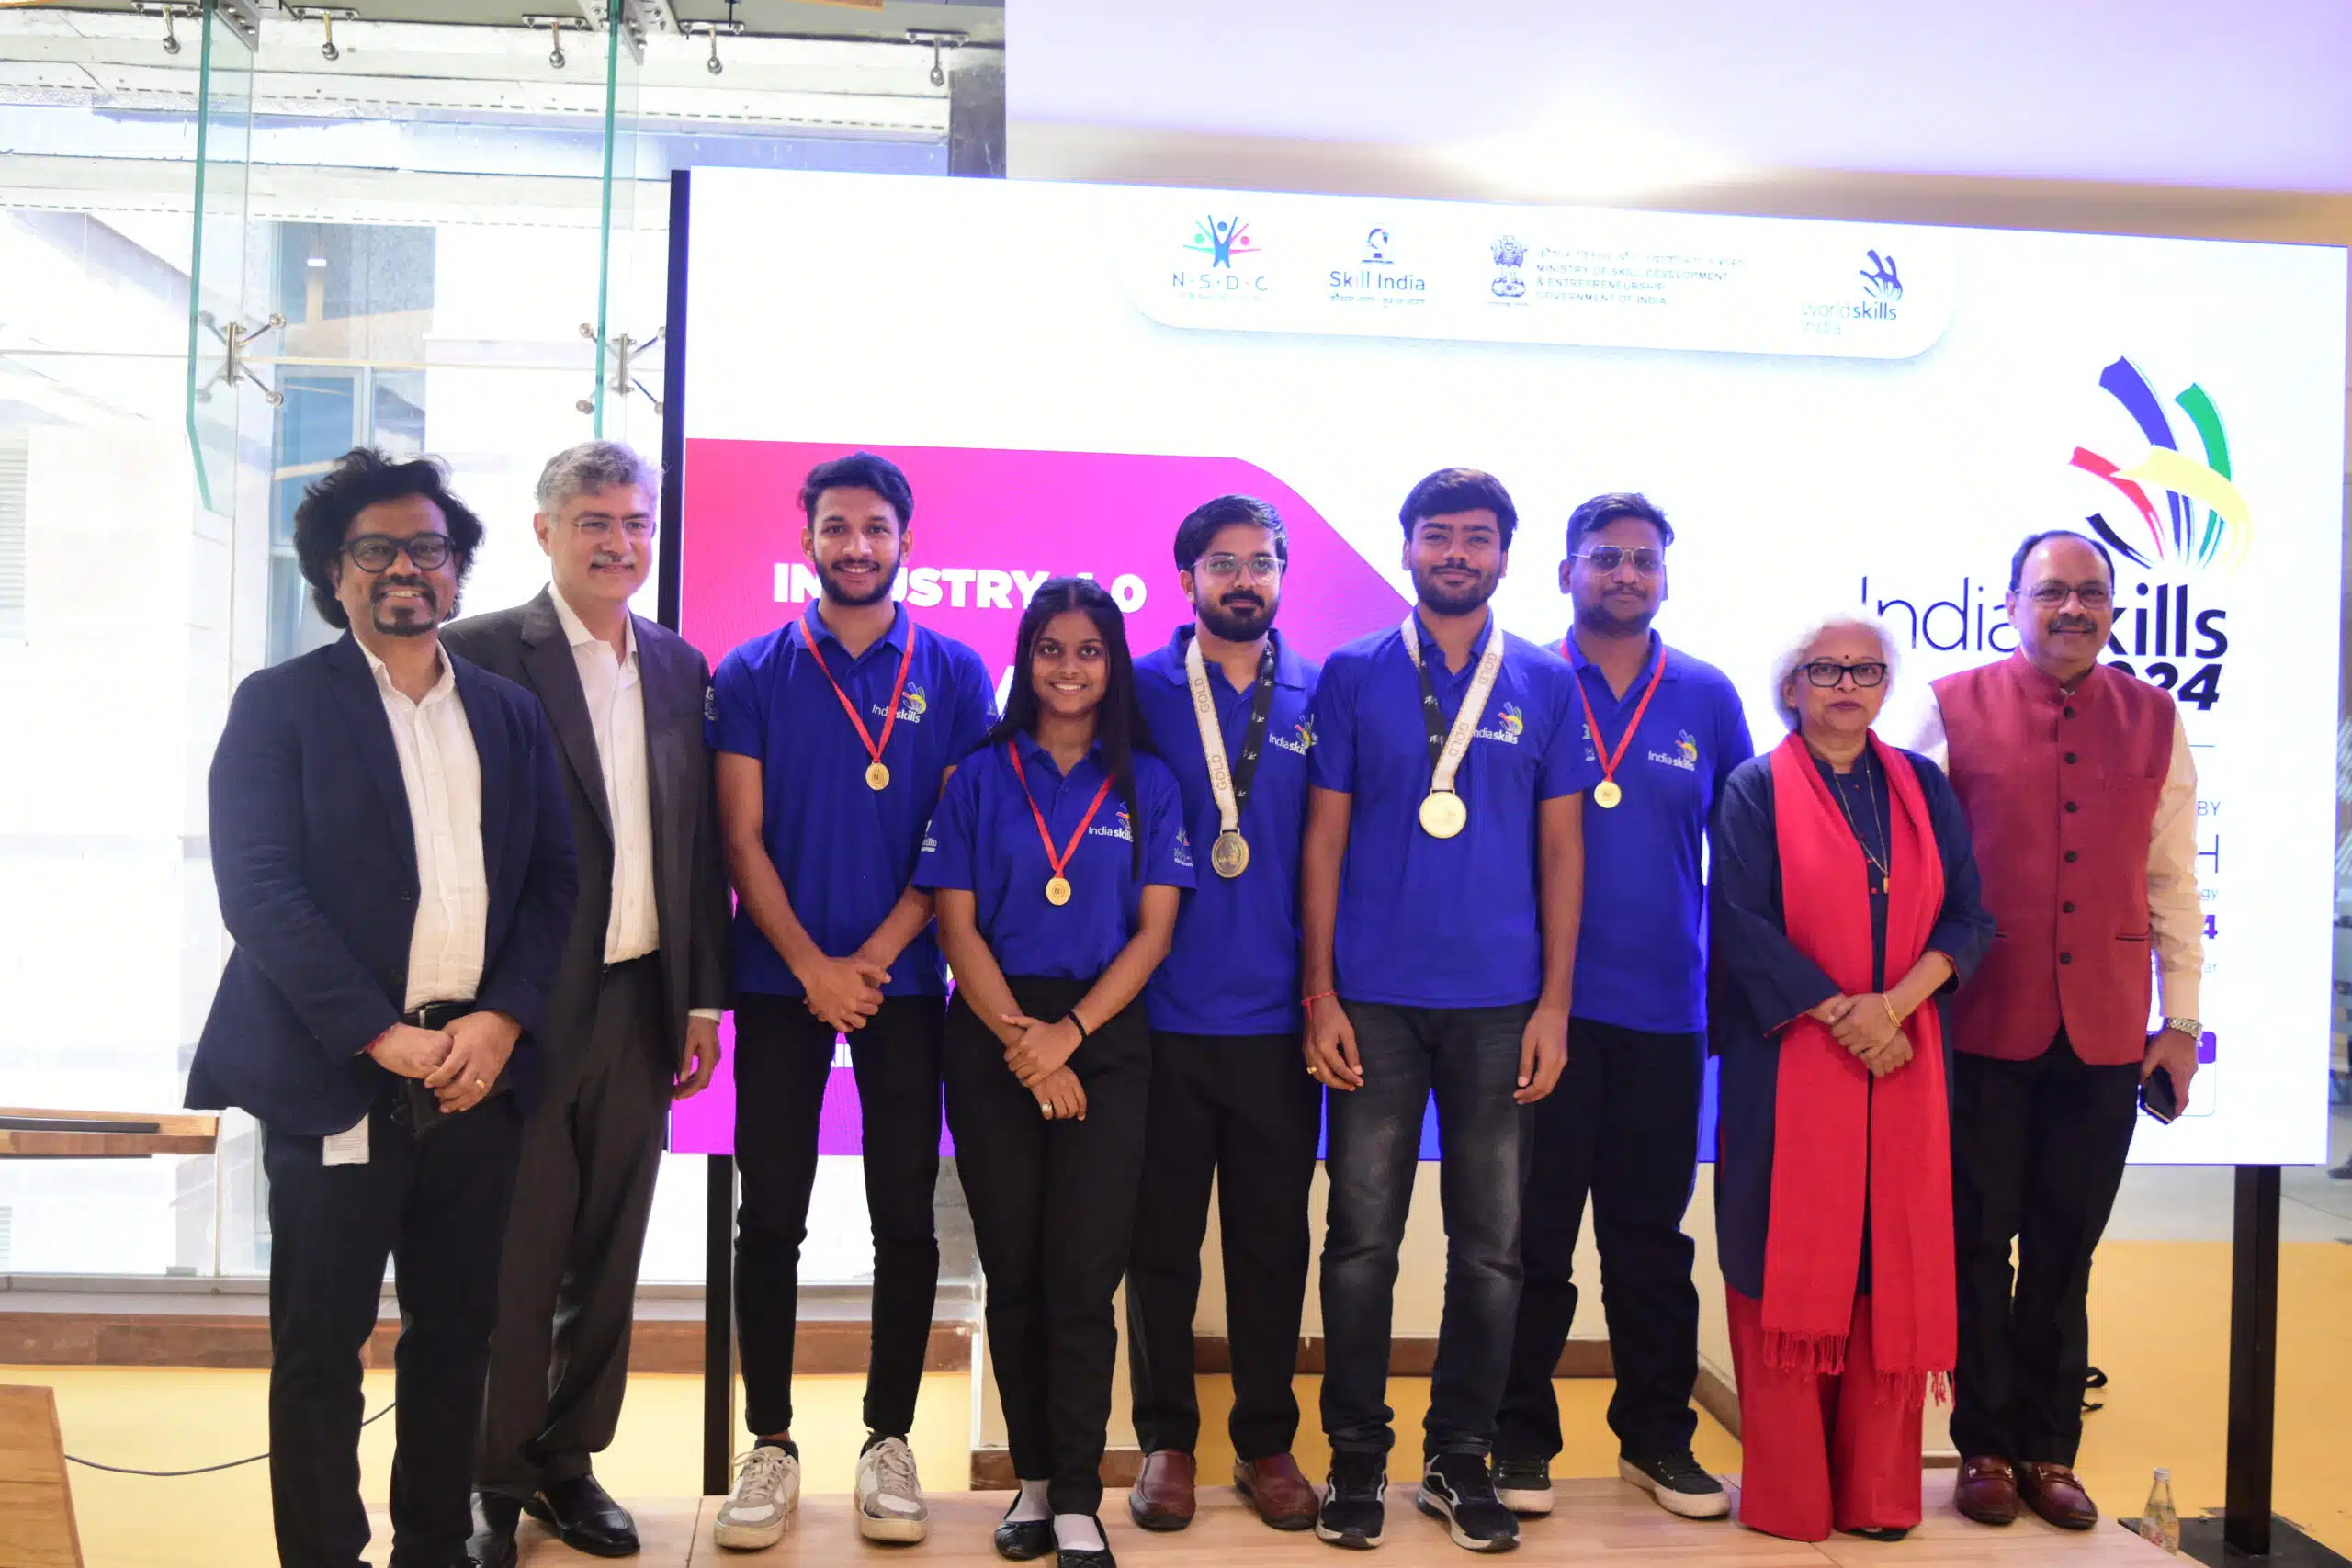 NAMTECH Students Bag Medals at IndiaSkills Competition